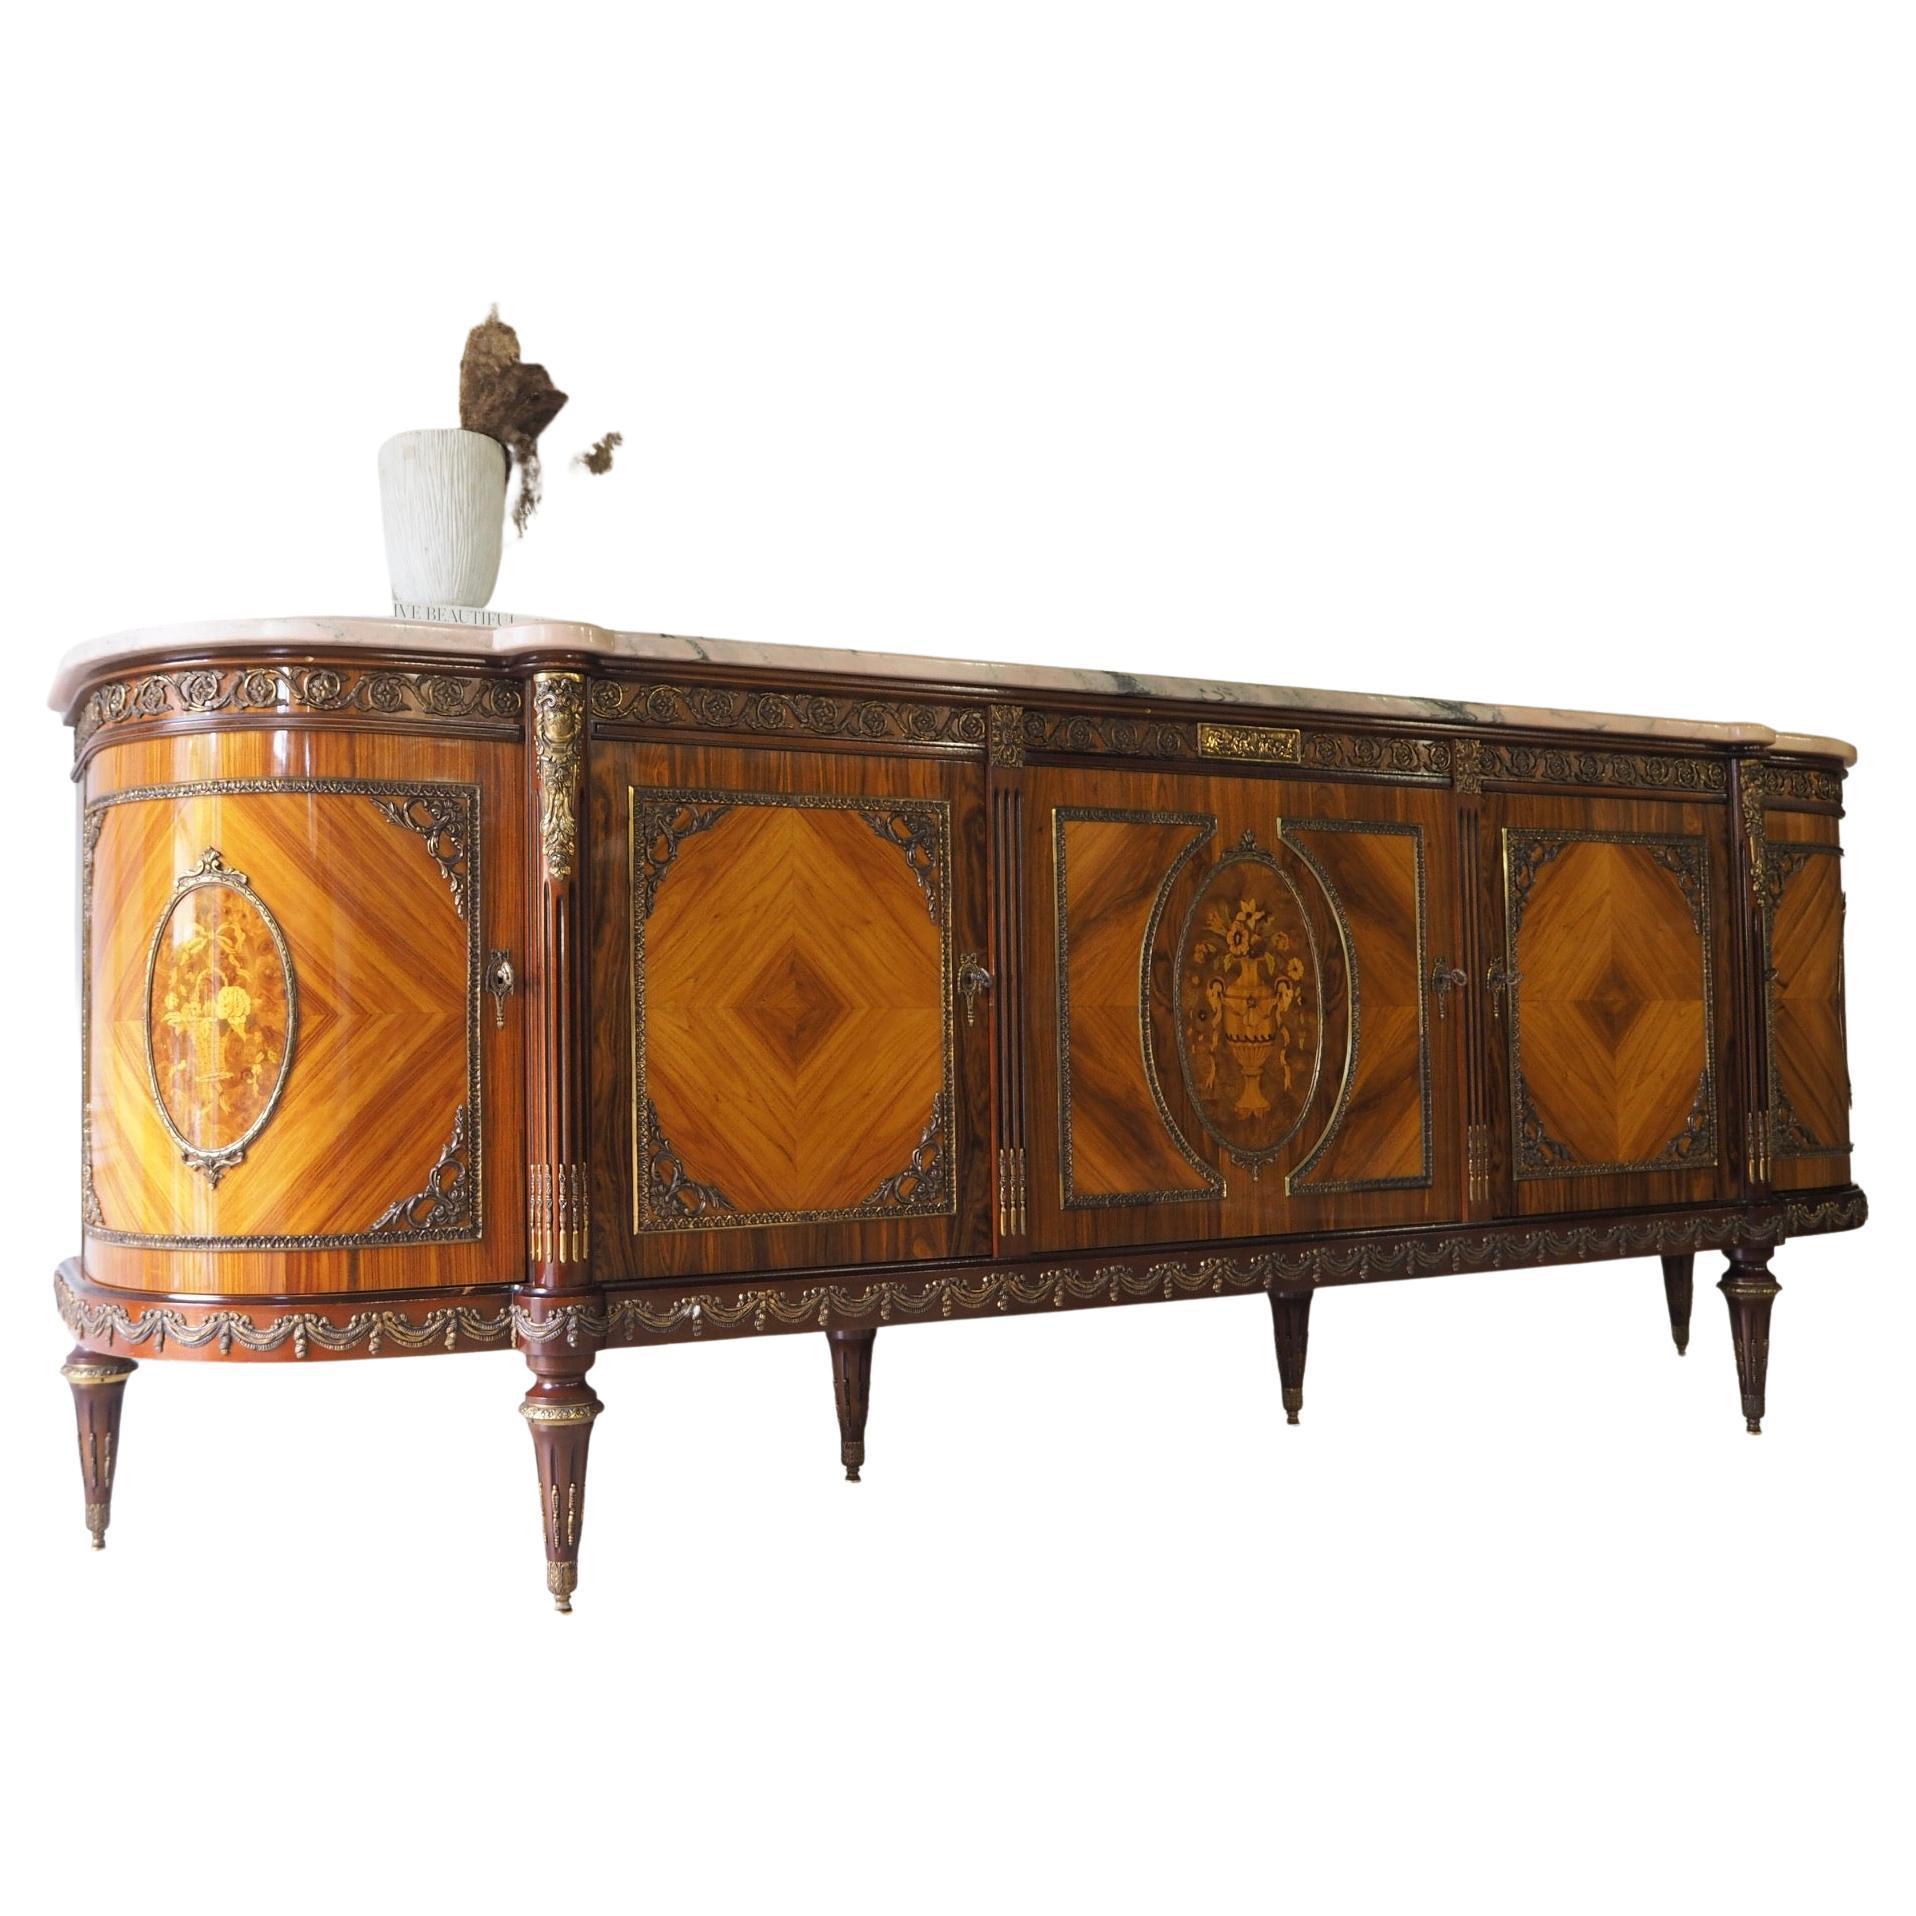 Large French Louis XVI Style Jp Ehalt Mahogany Sideboard Buffet Marble Top For Sale